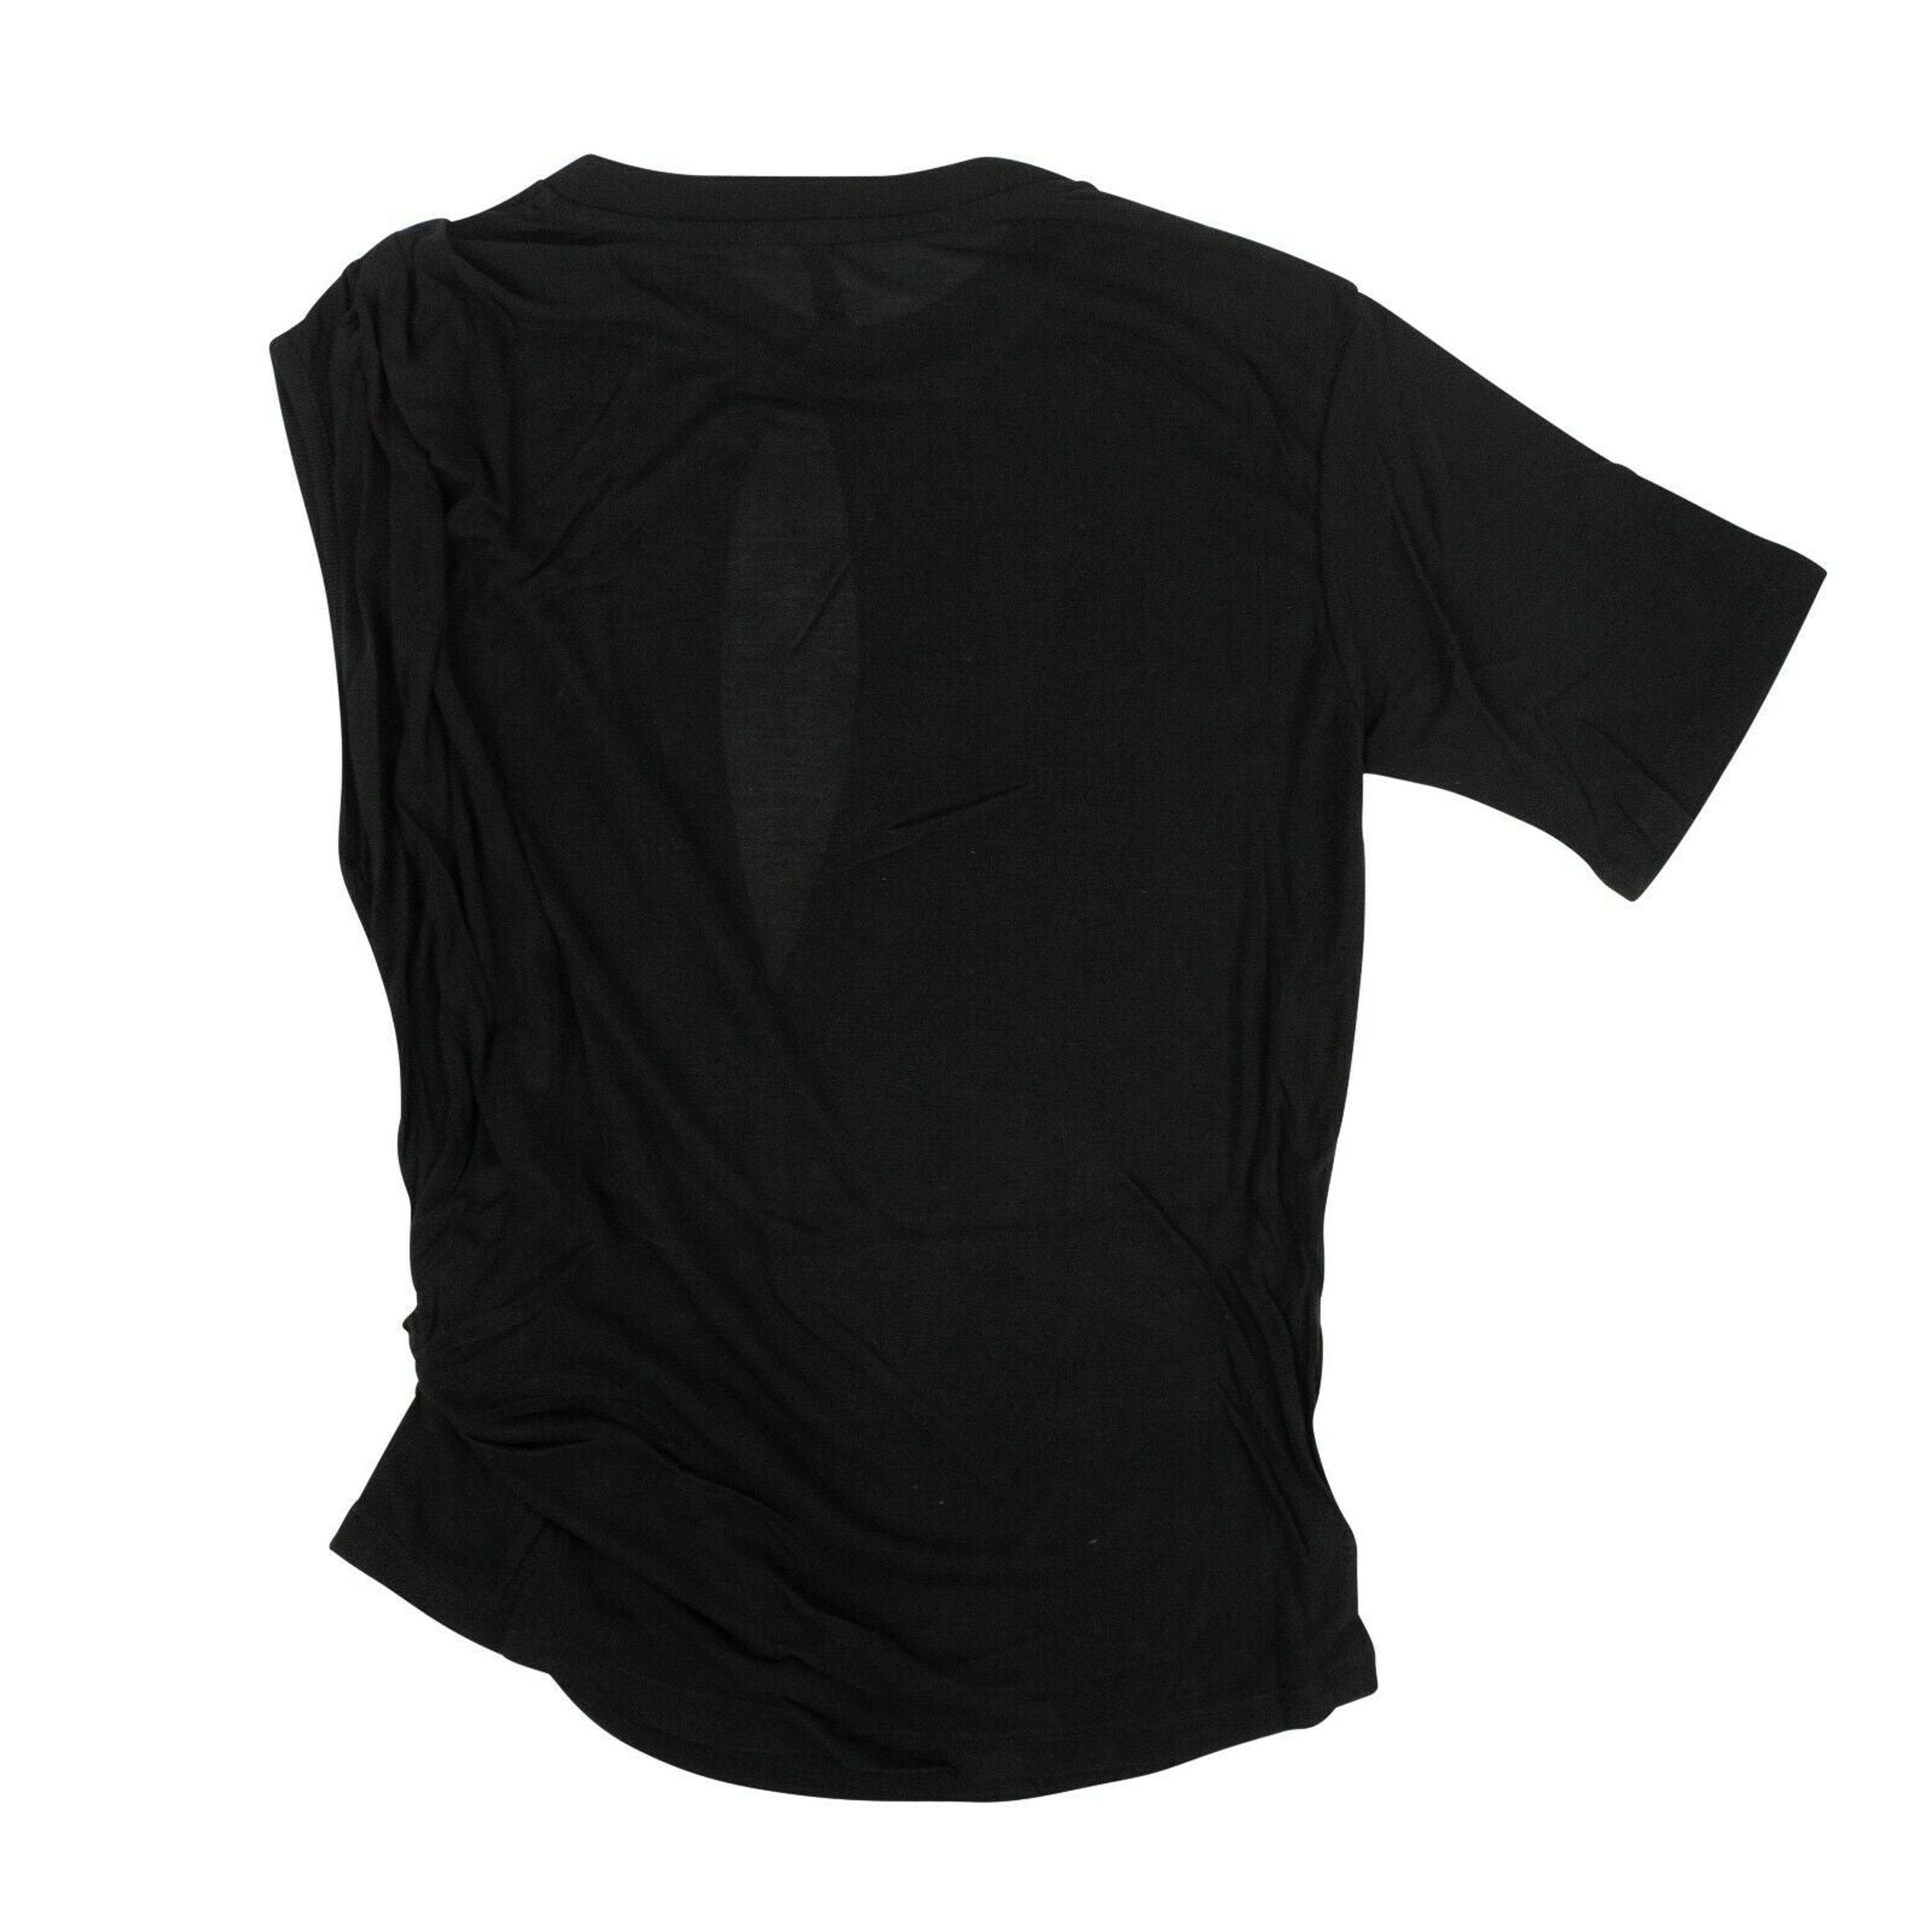 Alternate View 1 of Unravel Project Silk Draped T-Shirt - Black